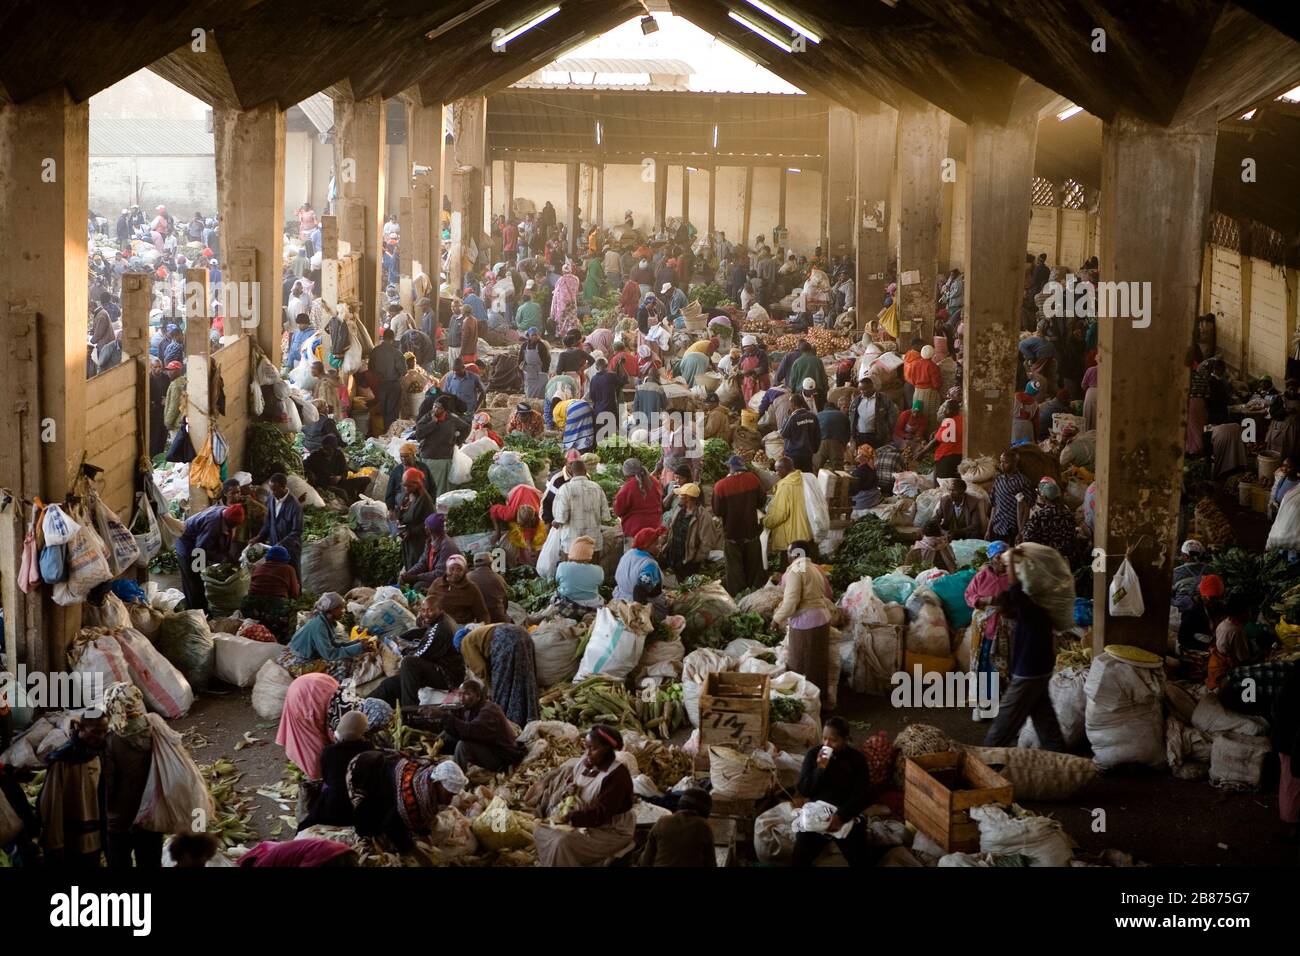 A general view shows the Wakulima market in Nairobi, Kenya on March 9, 2011. Wakulima is the biggest market in East Africa. Stock Photo